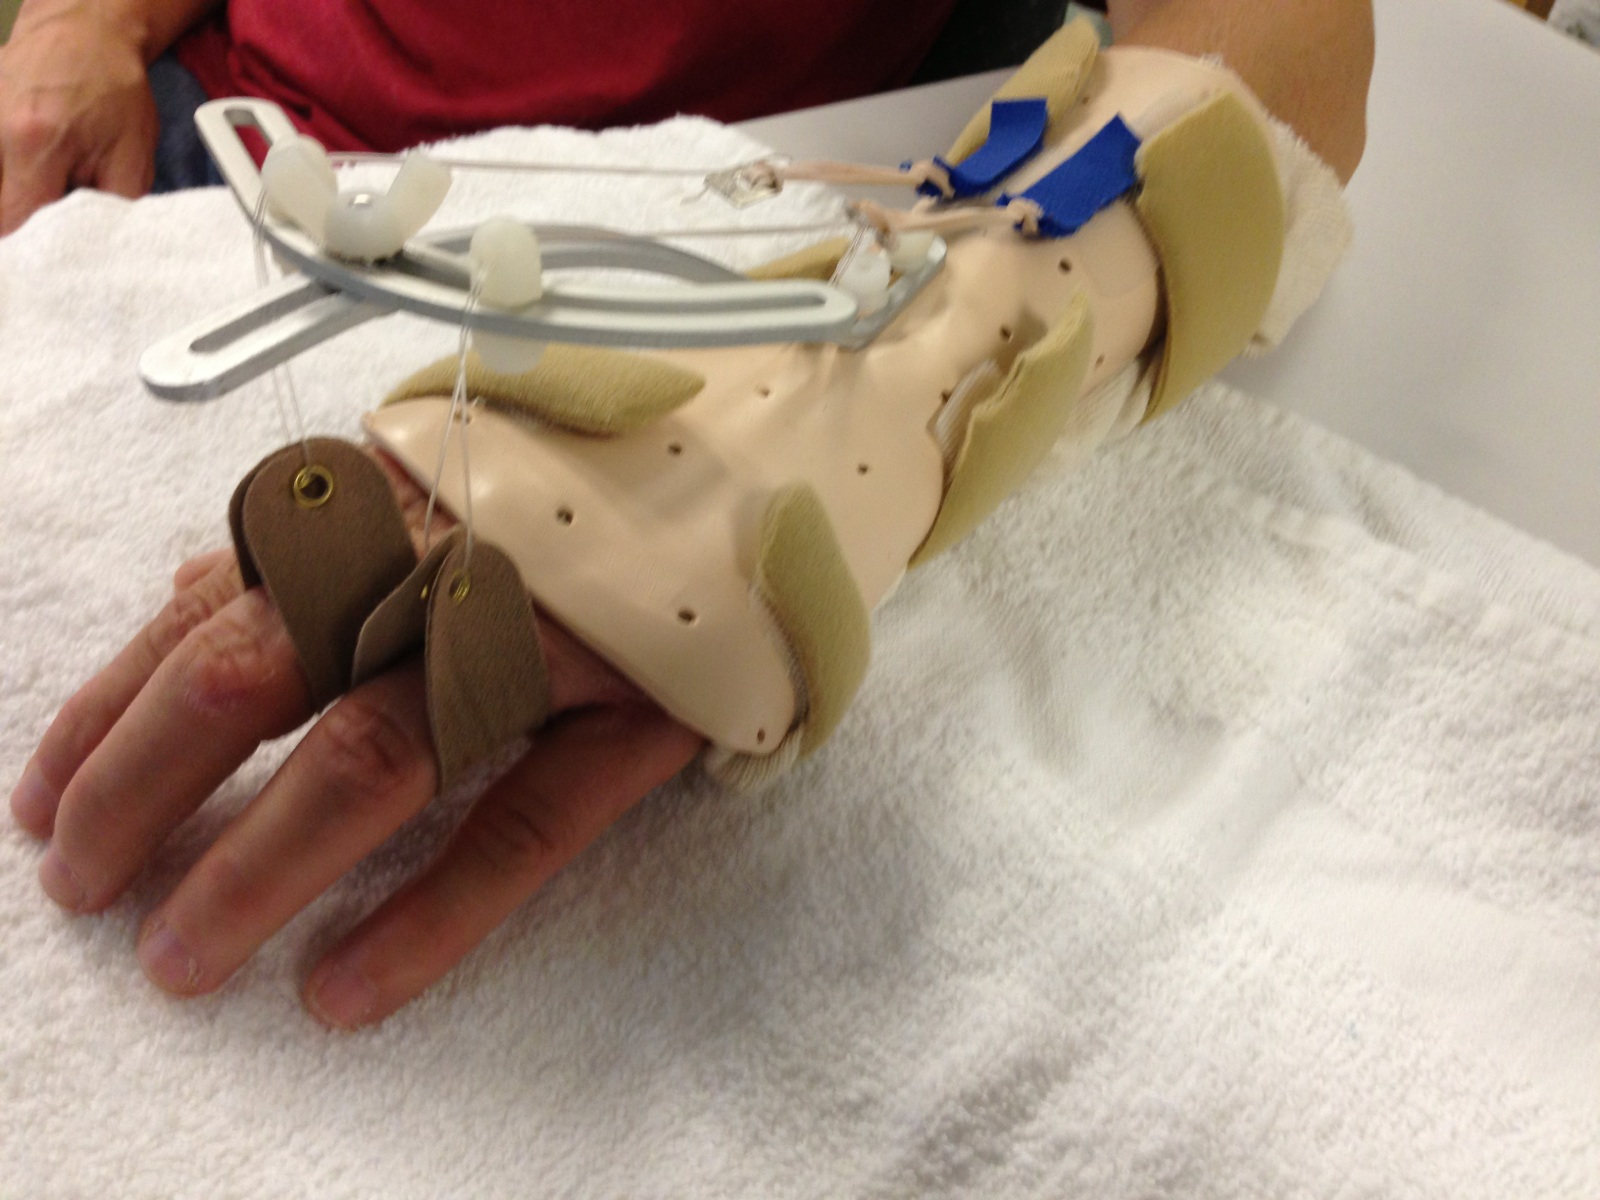 Custom splinting is used post operatively for protection/immobilization